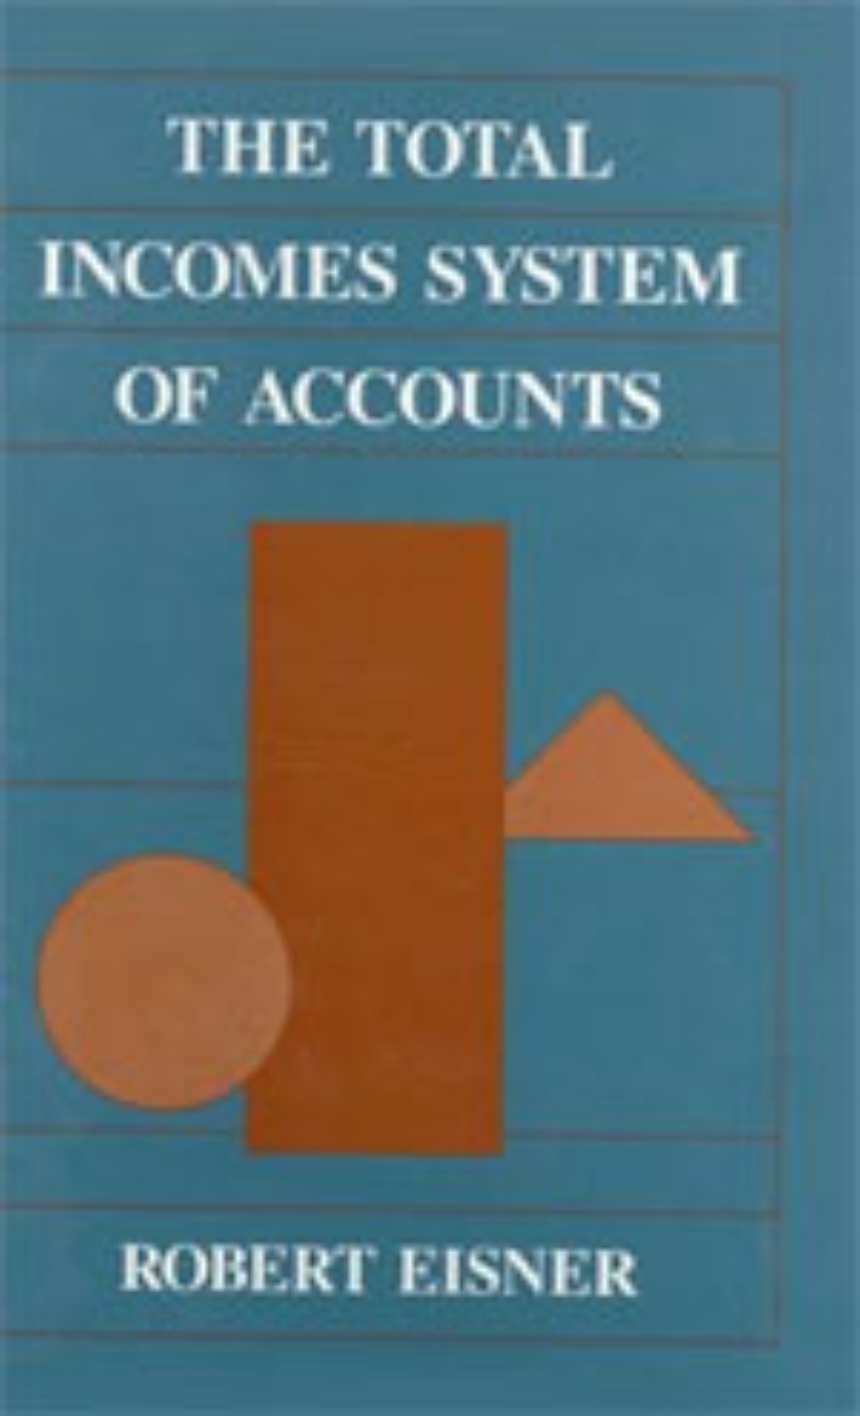 The Total Incomes System of Accounts